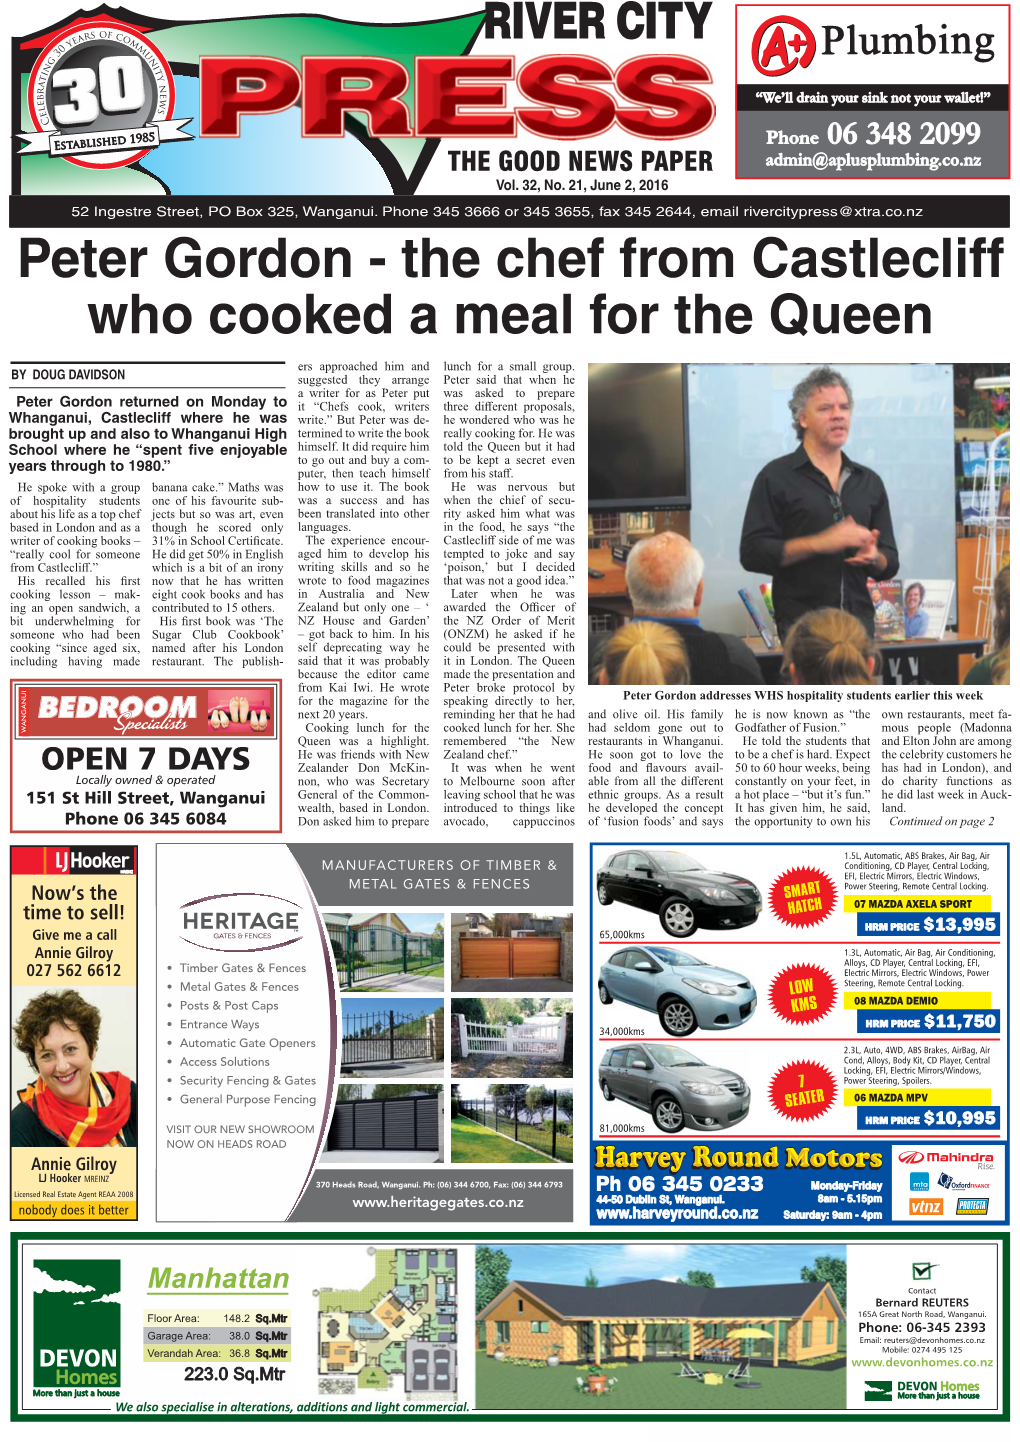 Peter Gordon - the Chef from Castlecliff Who Cooked a Meal for the Queen